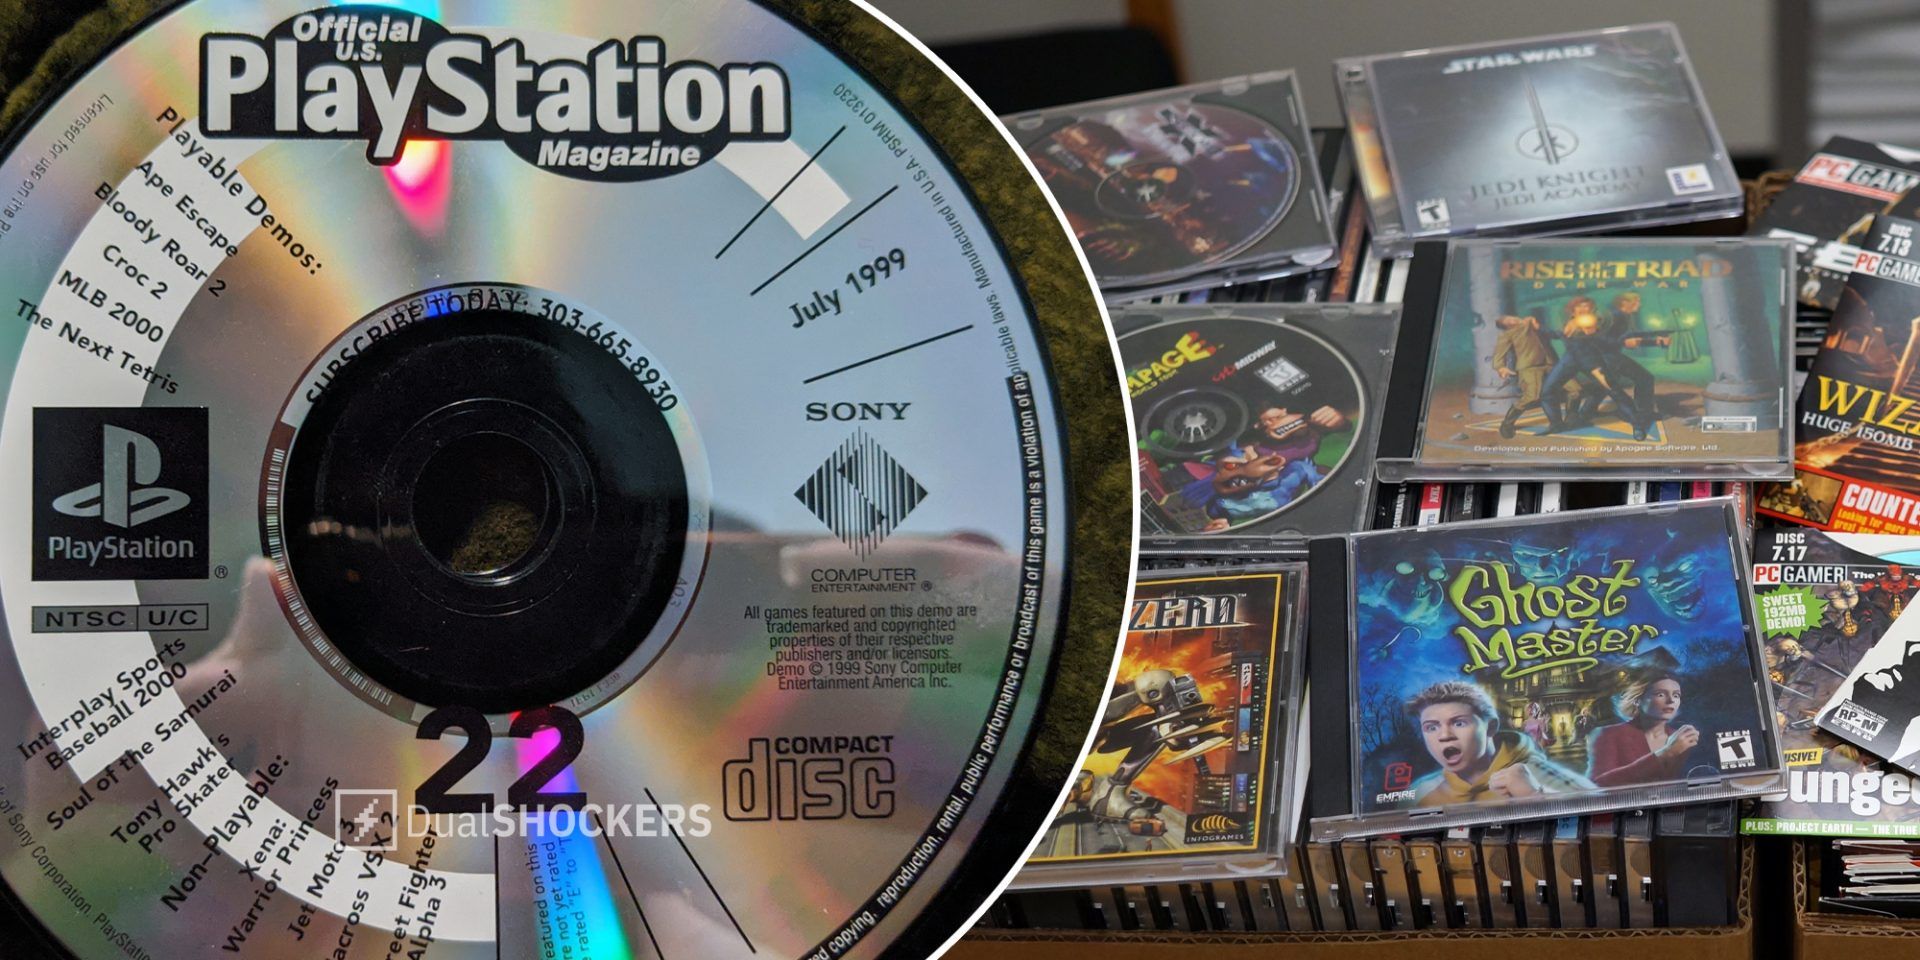 Playstation Magazine demo disc from July 1999 on left, collection of demo discs on right